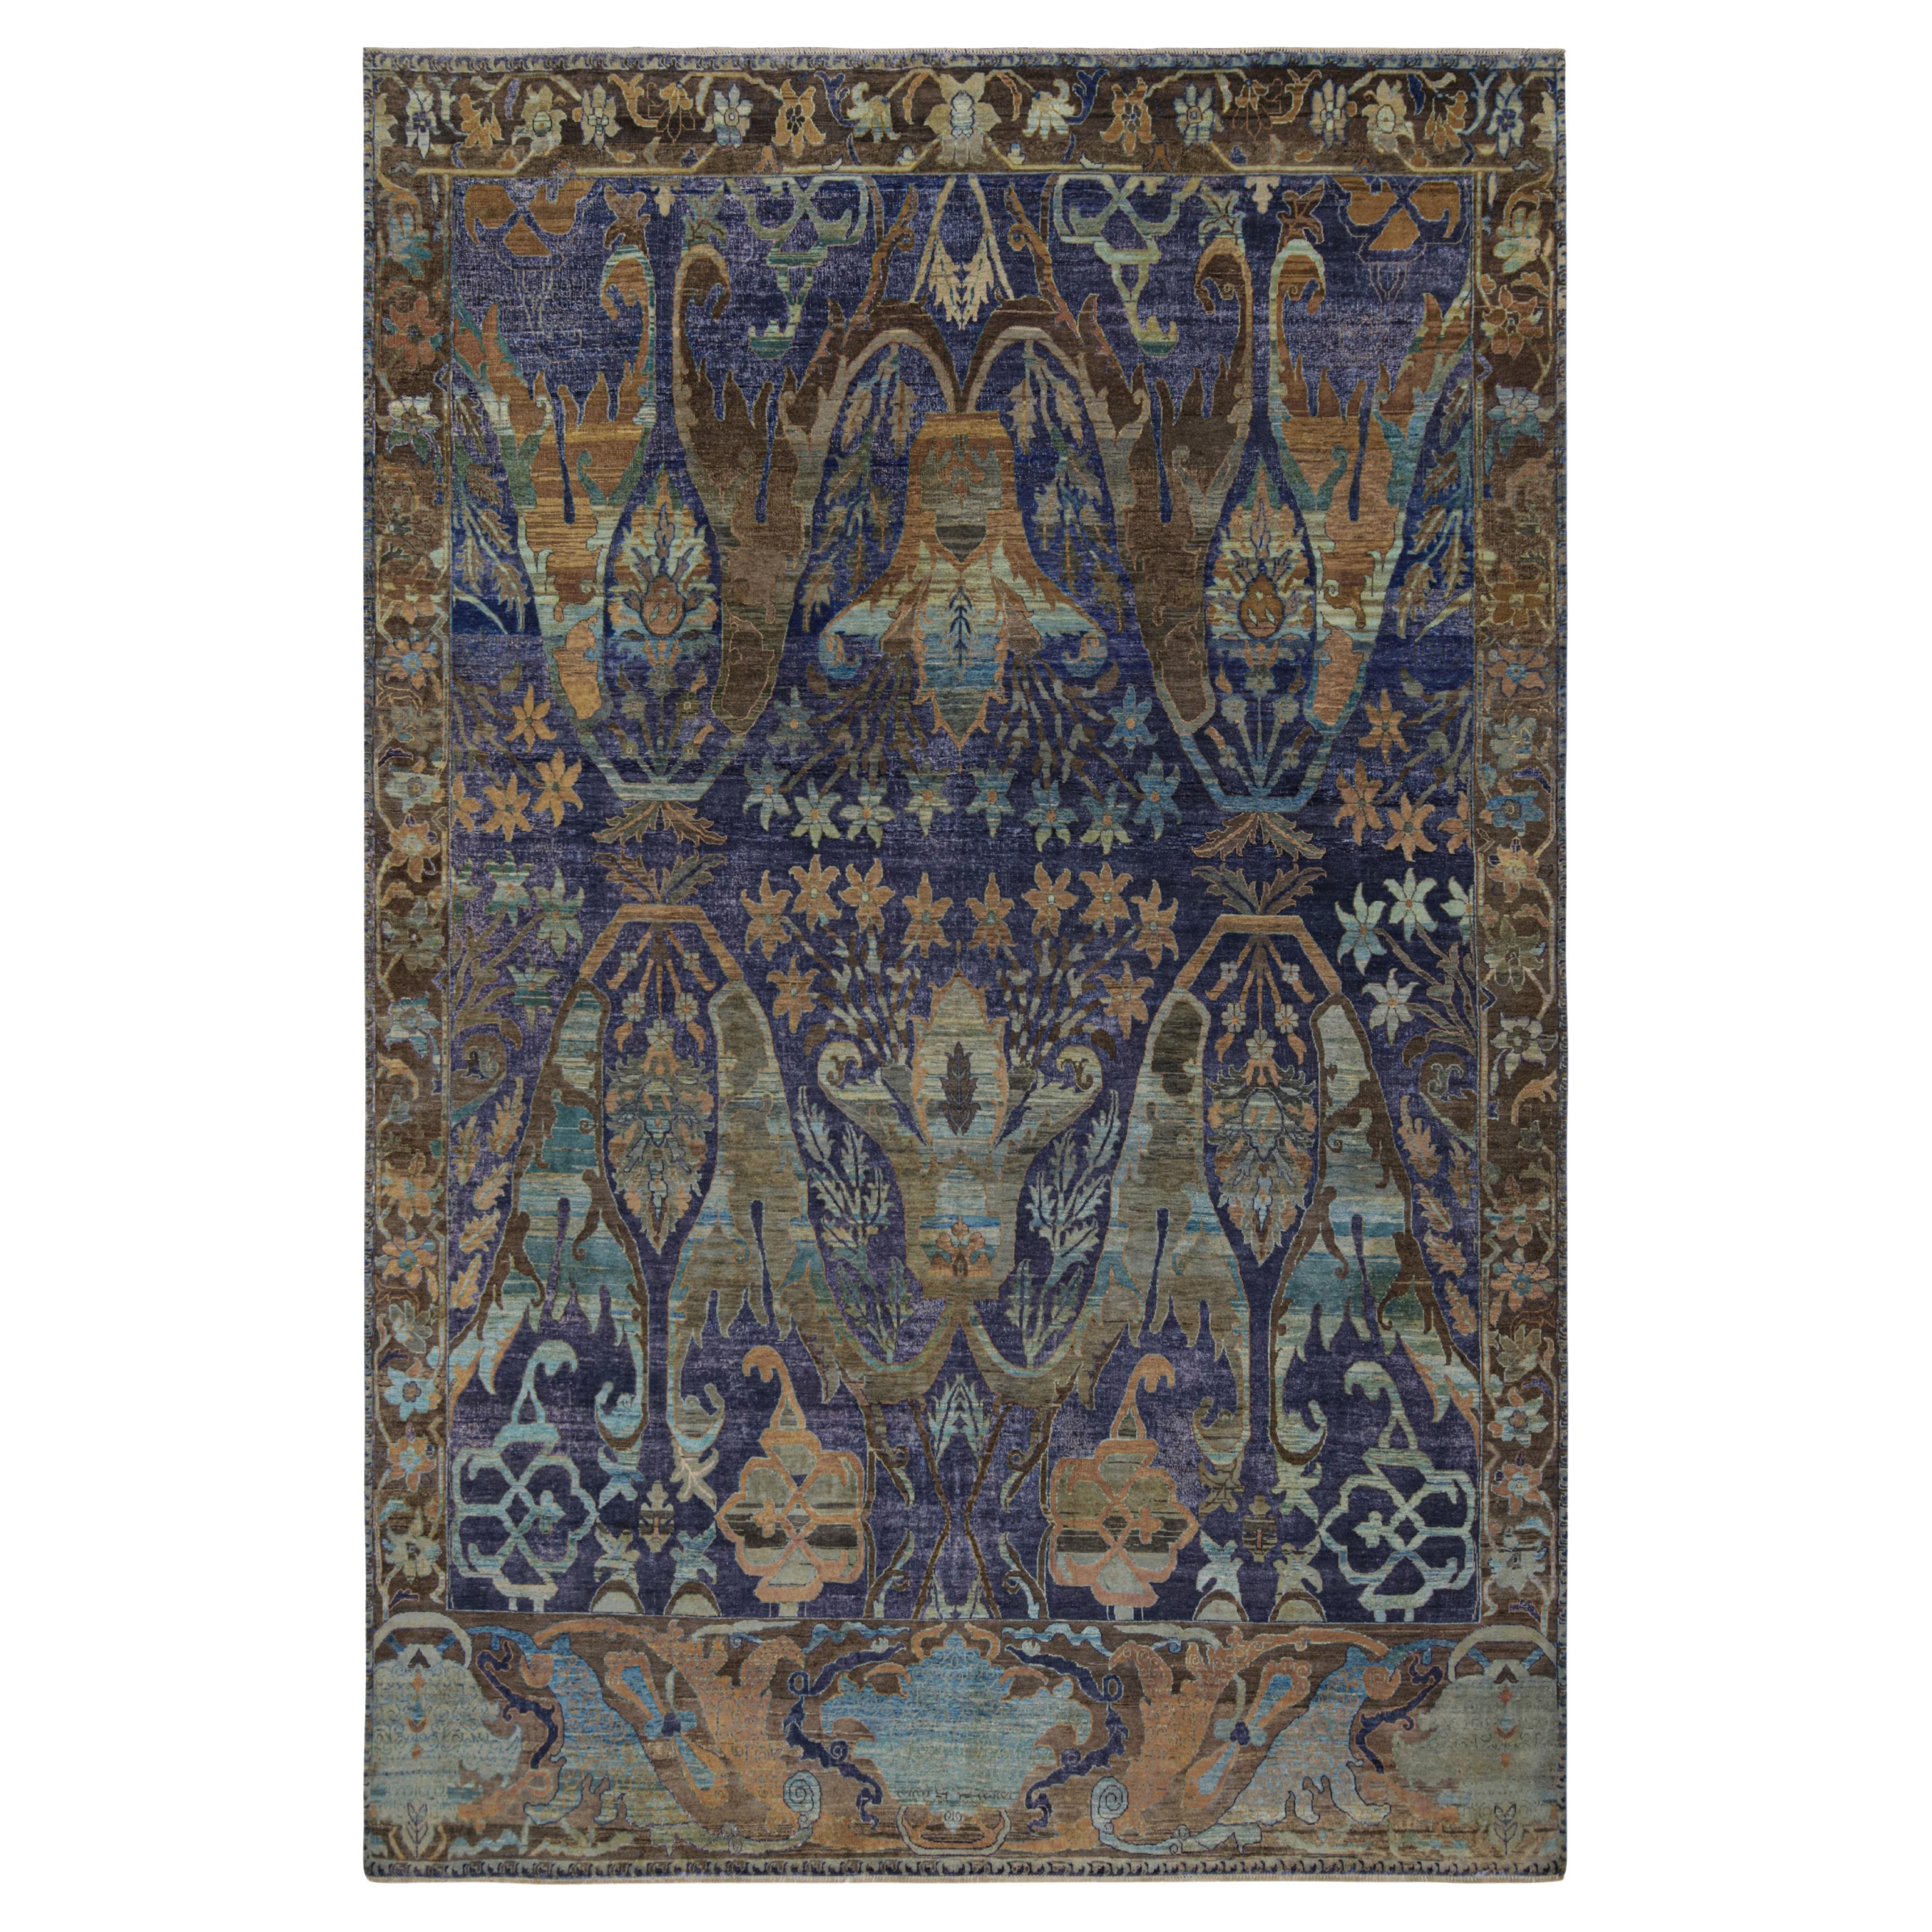 Rug & Kilim’s Oushak-Style Rug in Indigo, Brown and Brown Floral Patterns For Sale